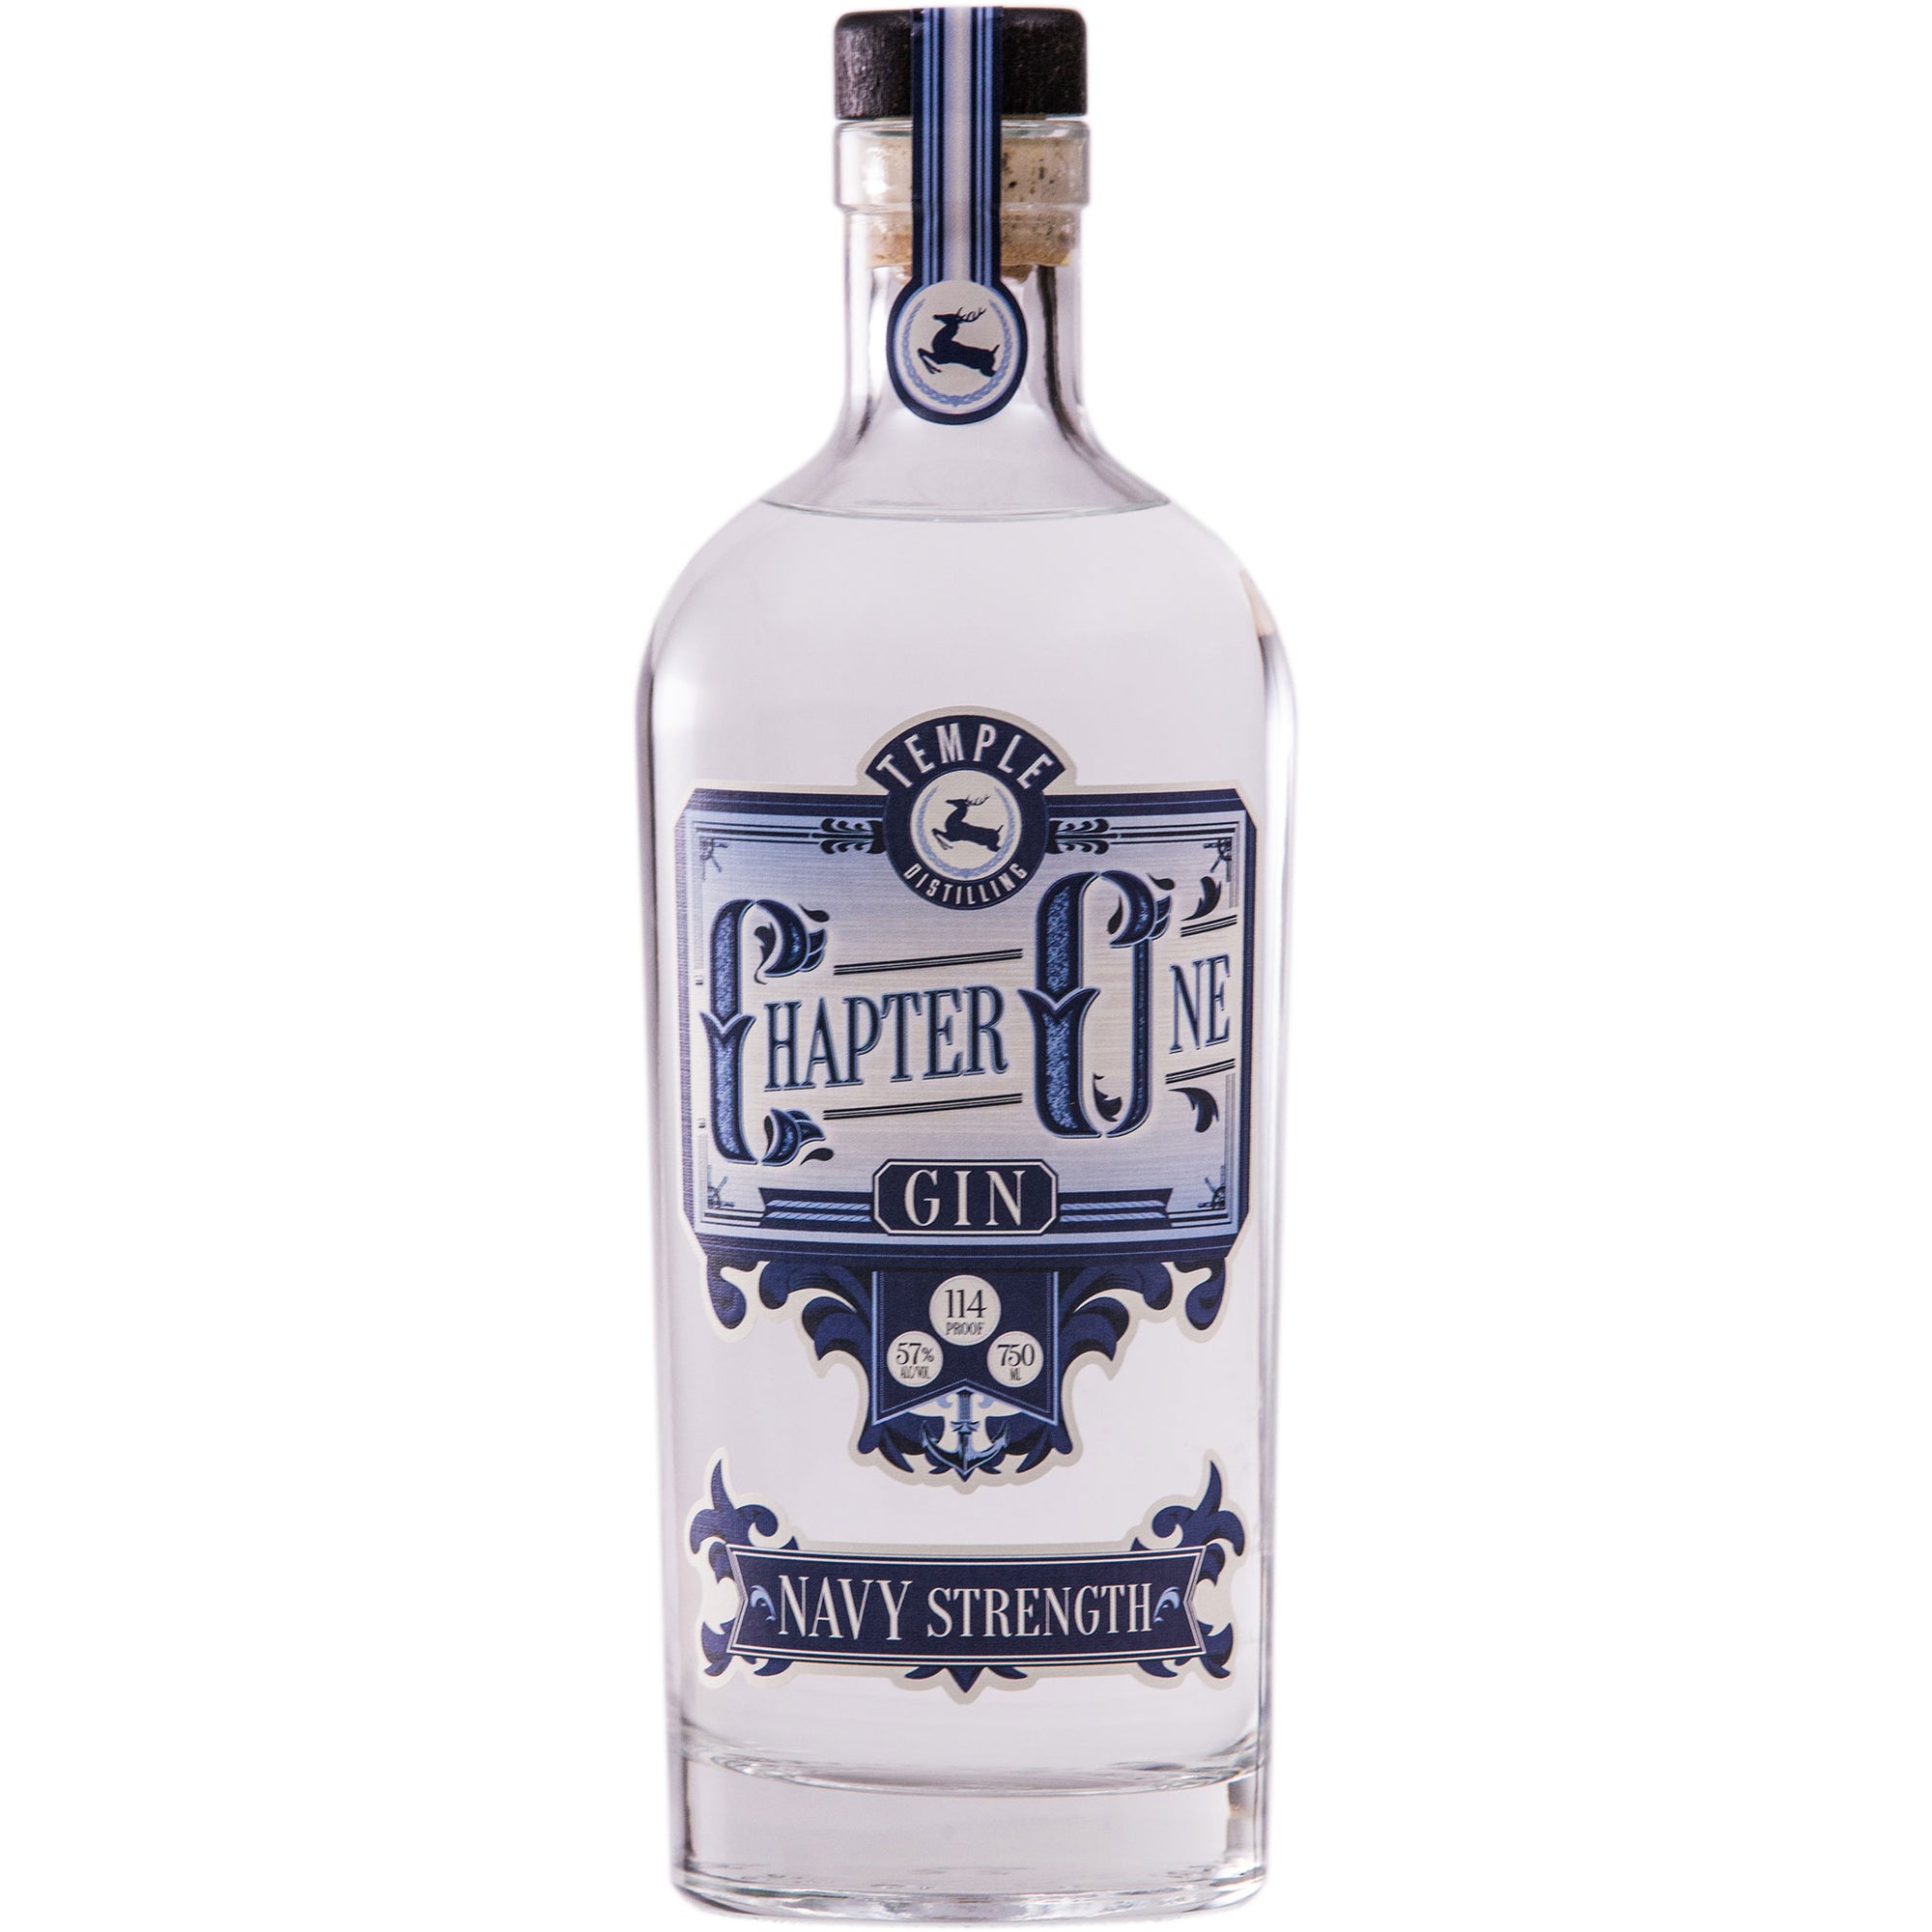 Chapter One Navy Strength Gin